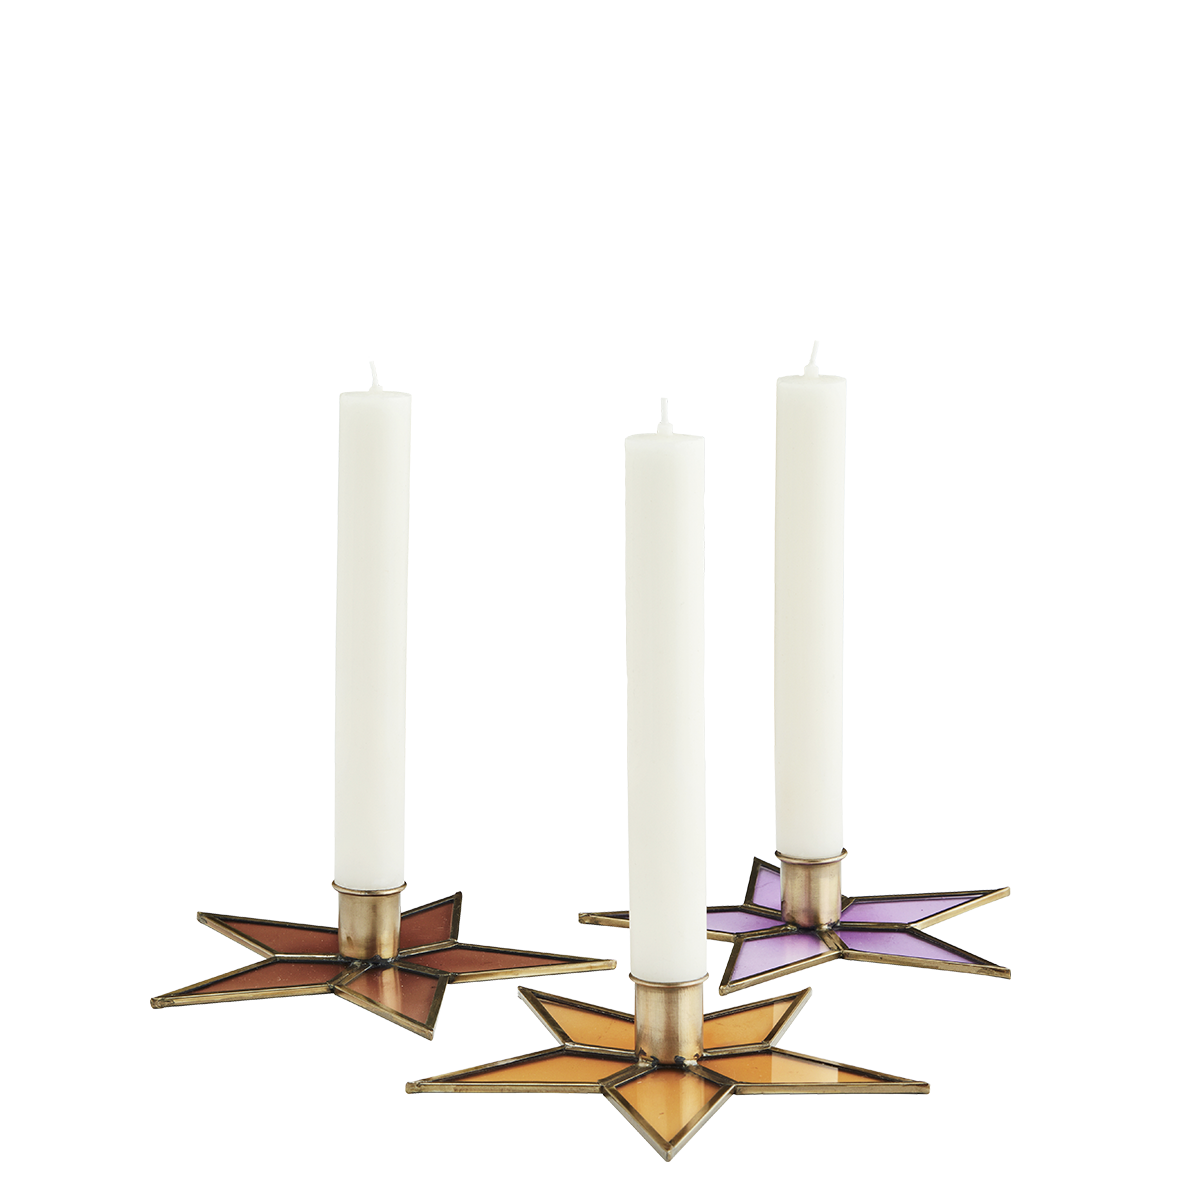 Glass candle stand